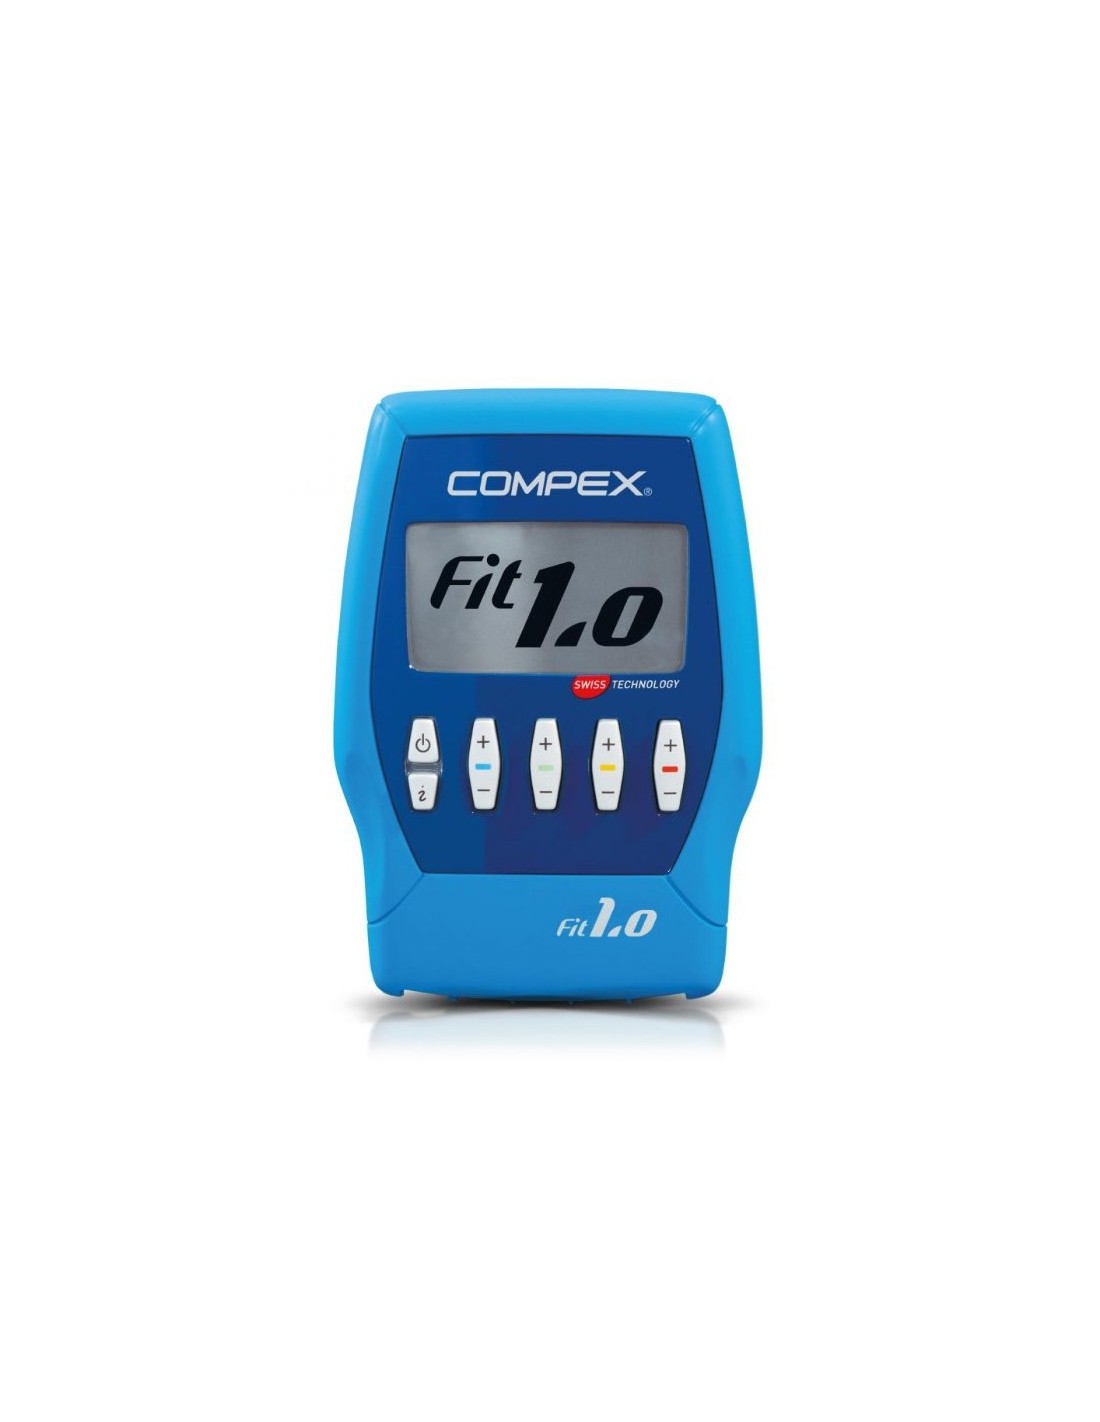 FICHA TÉCNICA ELECTROESTIMULADOR COMPEX FIT 1.0 by FIPsport - Issuu